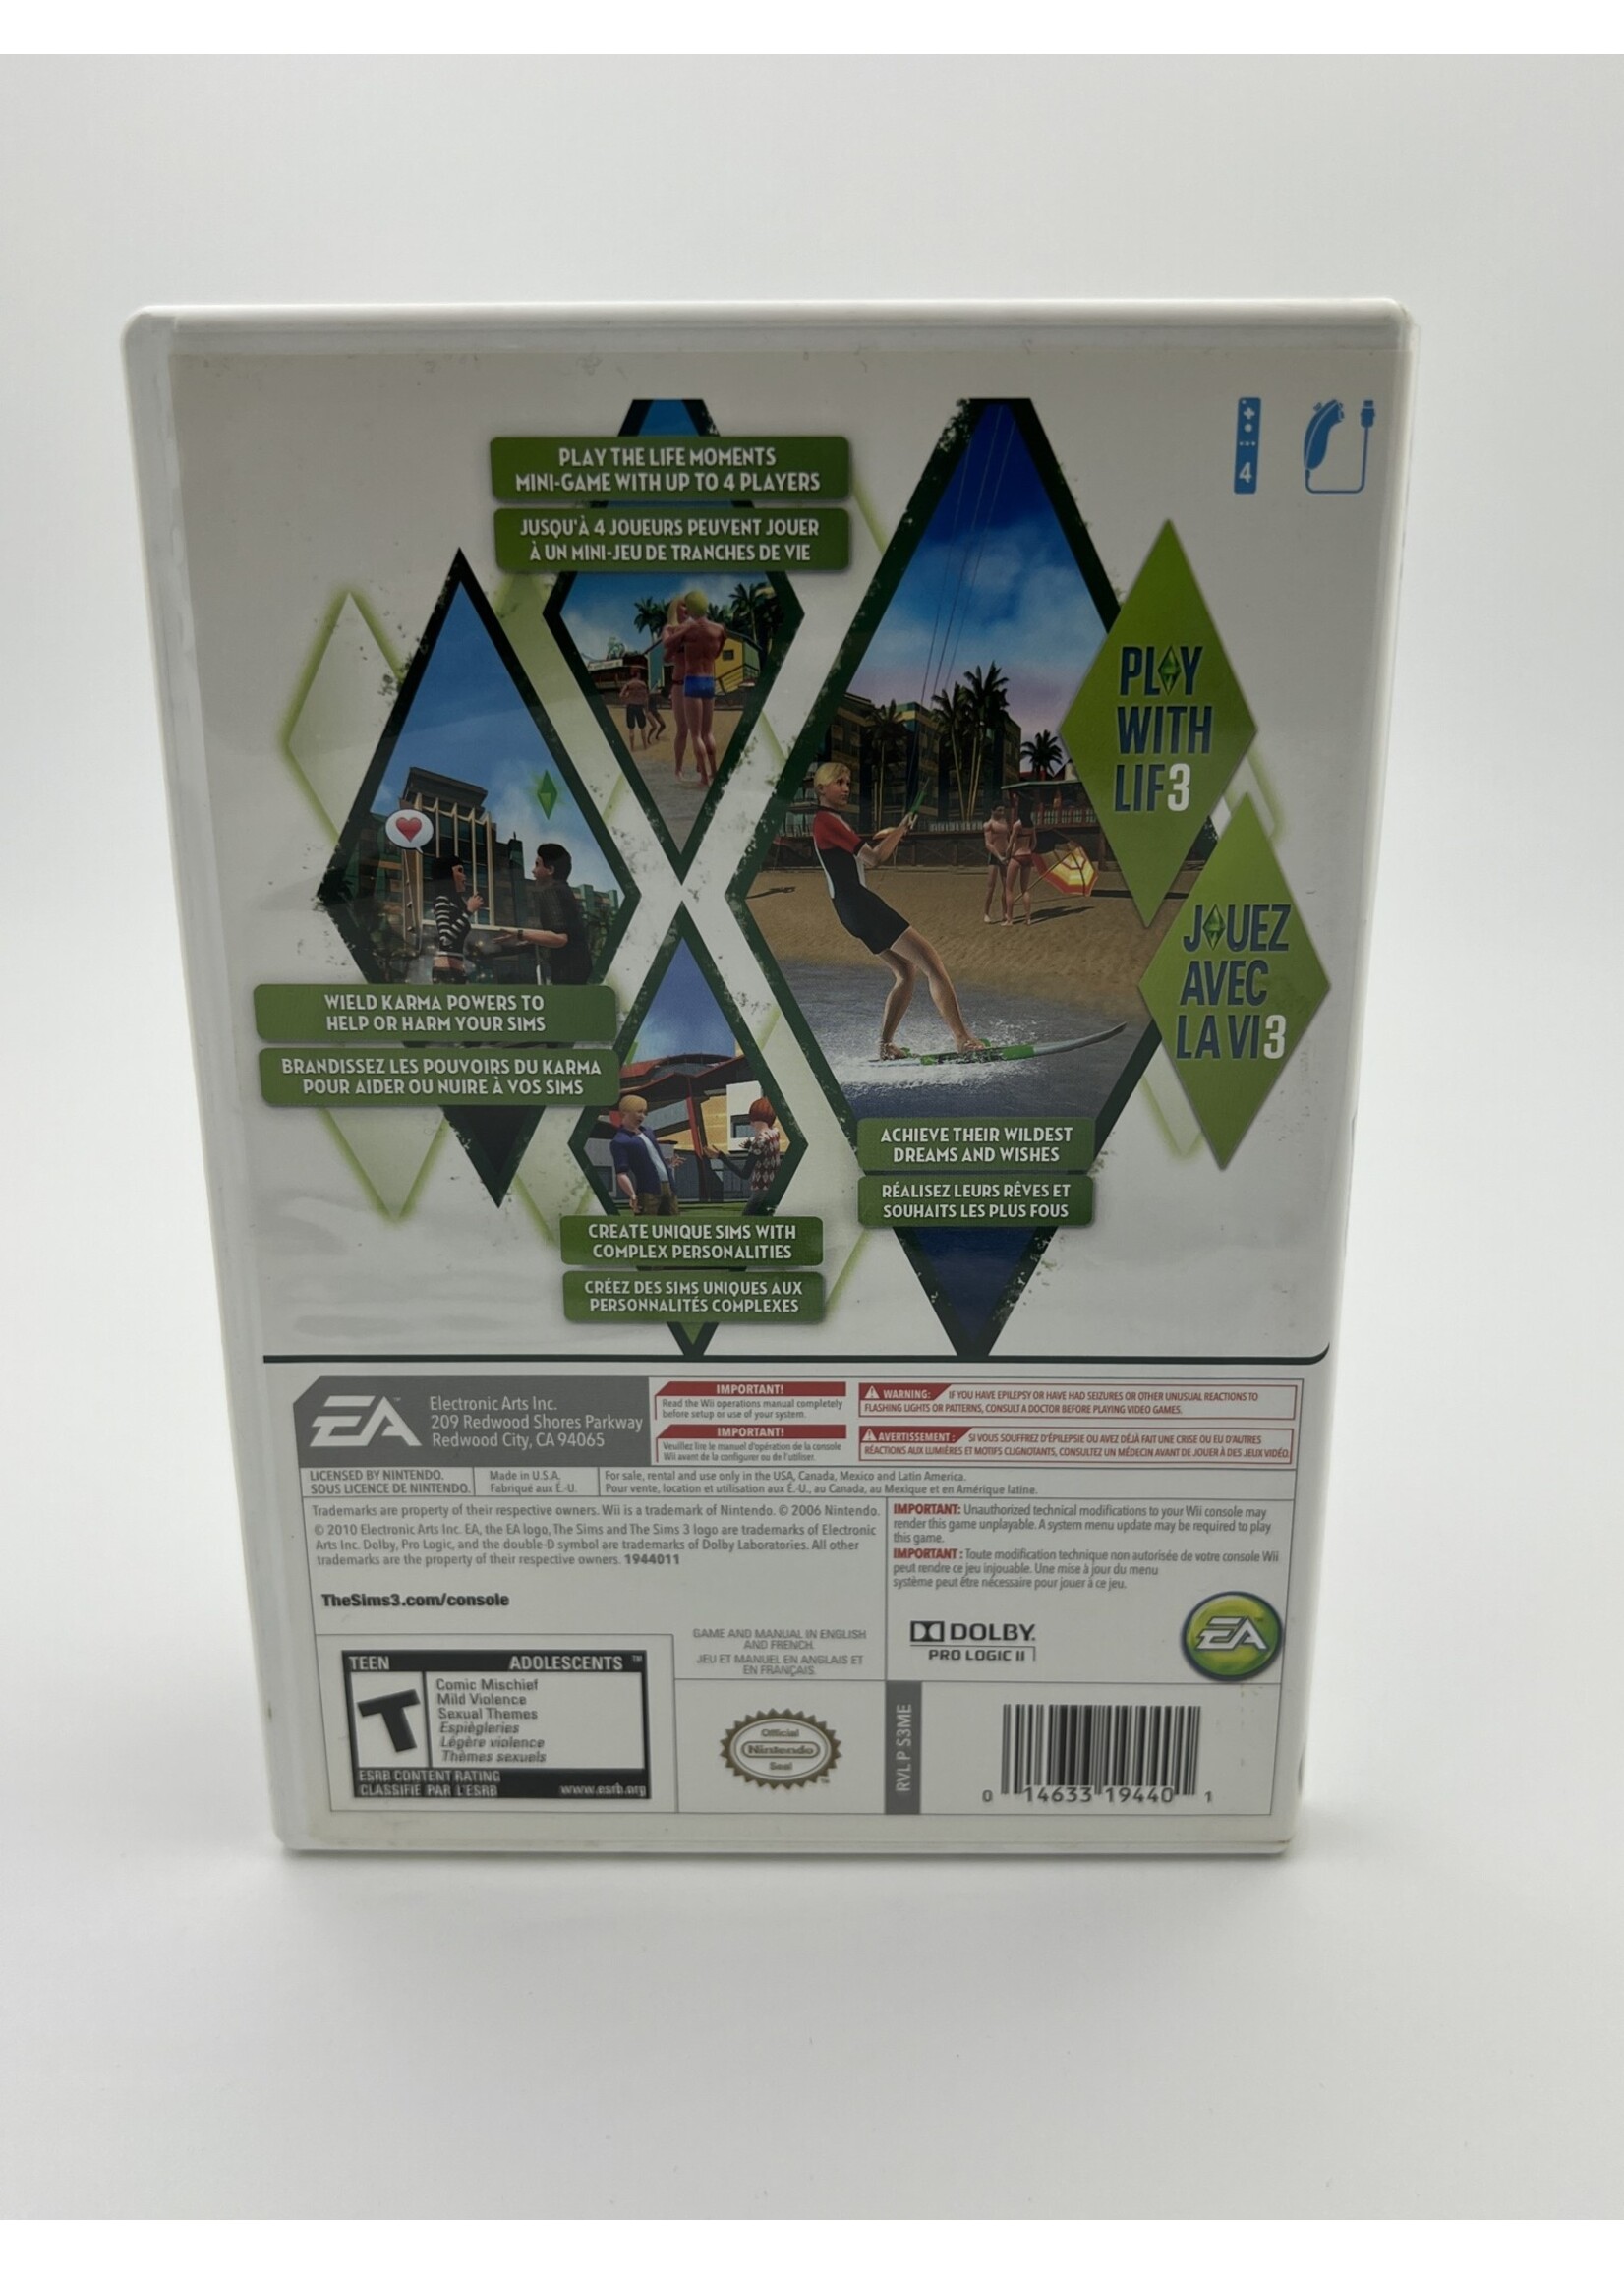 Nintendo The Sims 3 Wii